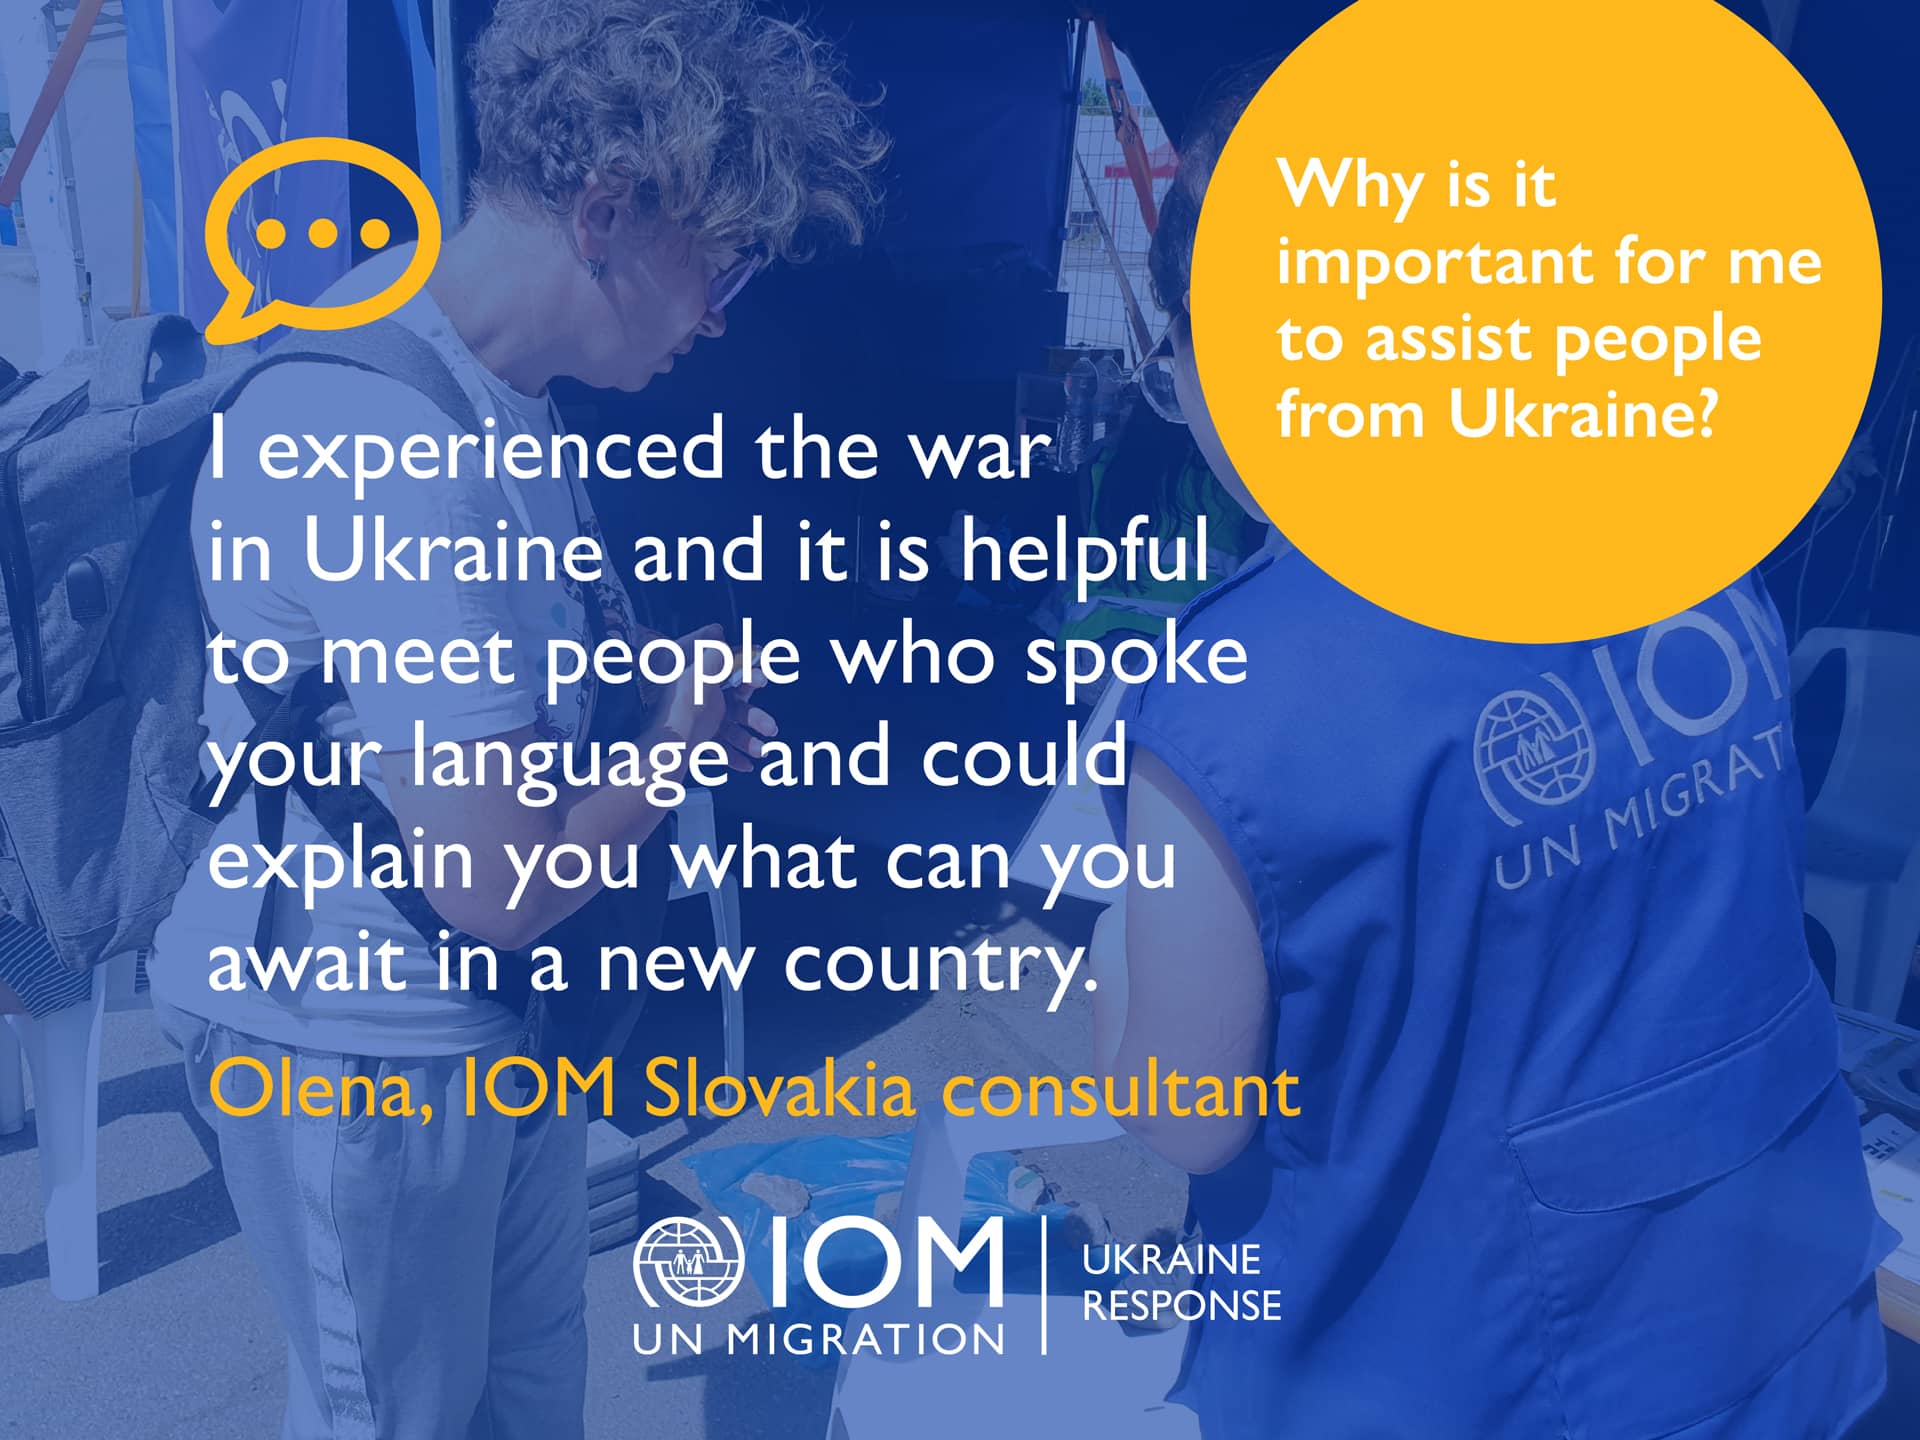 Olena, IOM Slovakia consultant - Why it is important for me to assist people from Ukraine